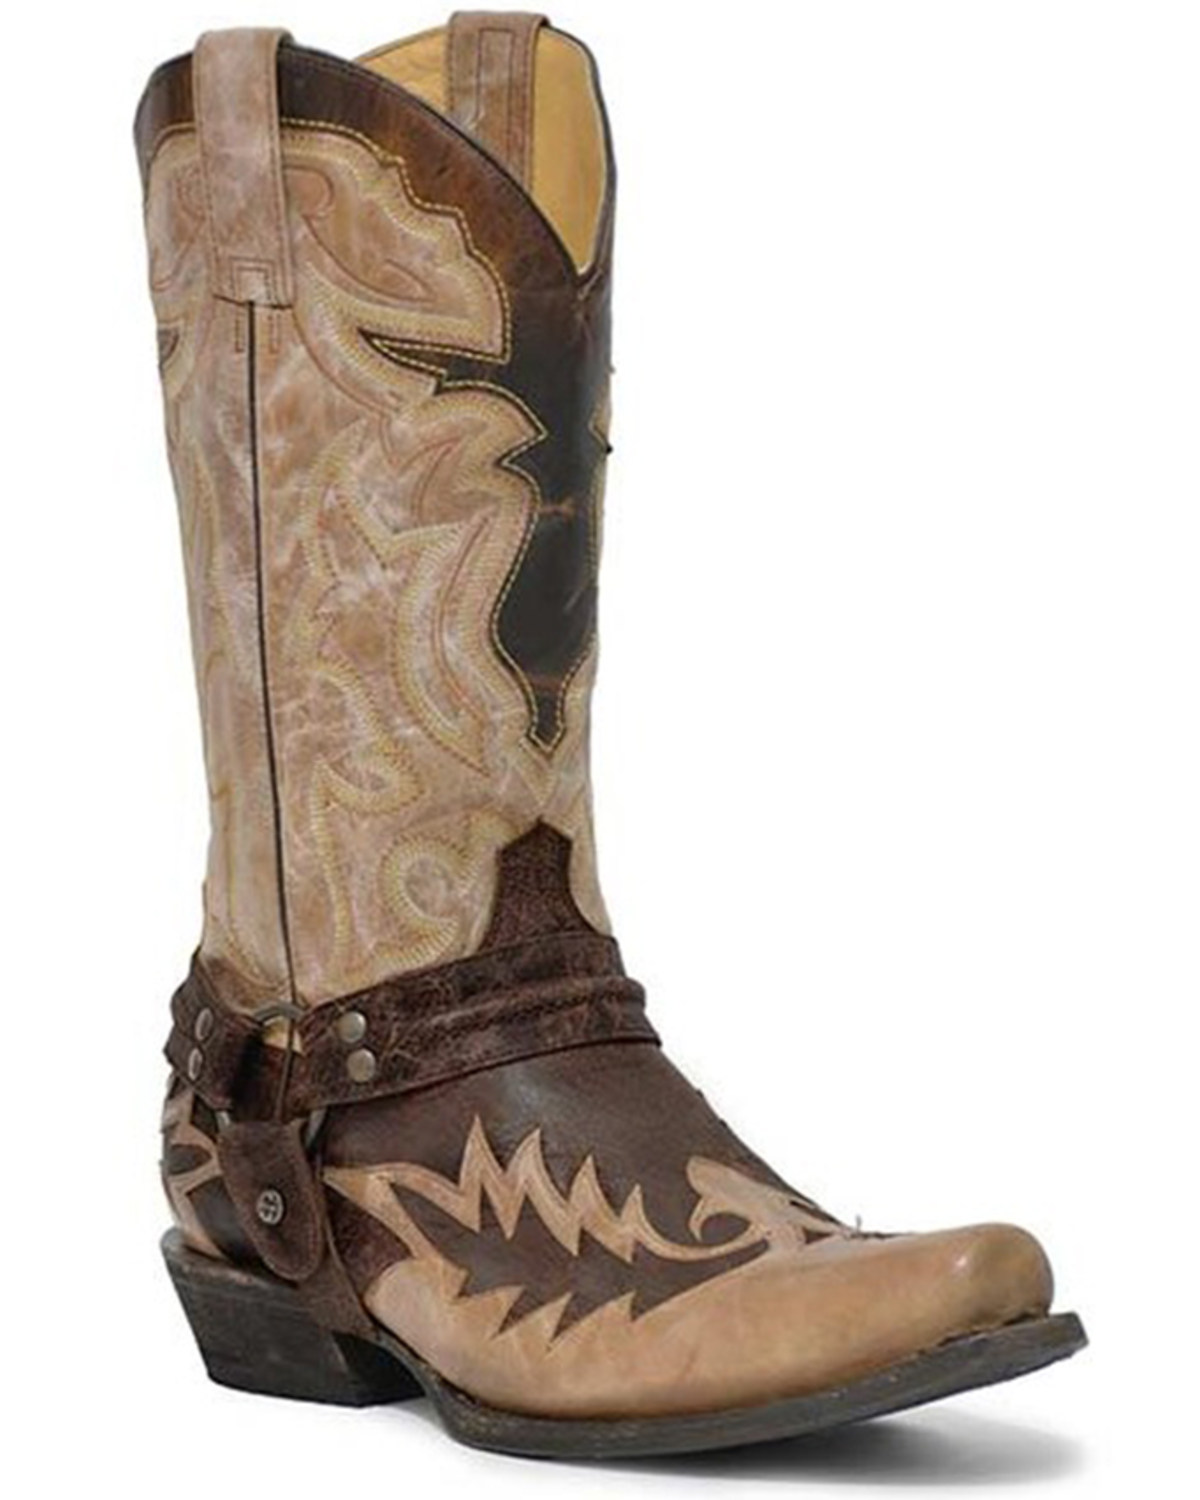 Stetson Men's Outlaw Bad Guy Wing Tip Harness Western Boots - Snip Toe